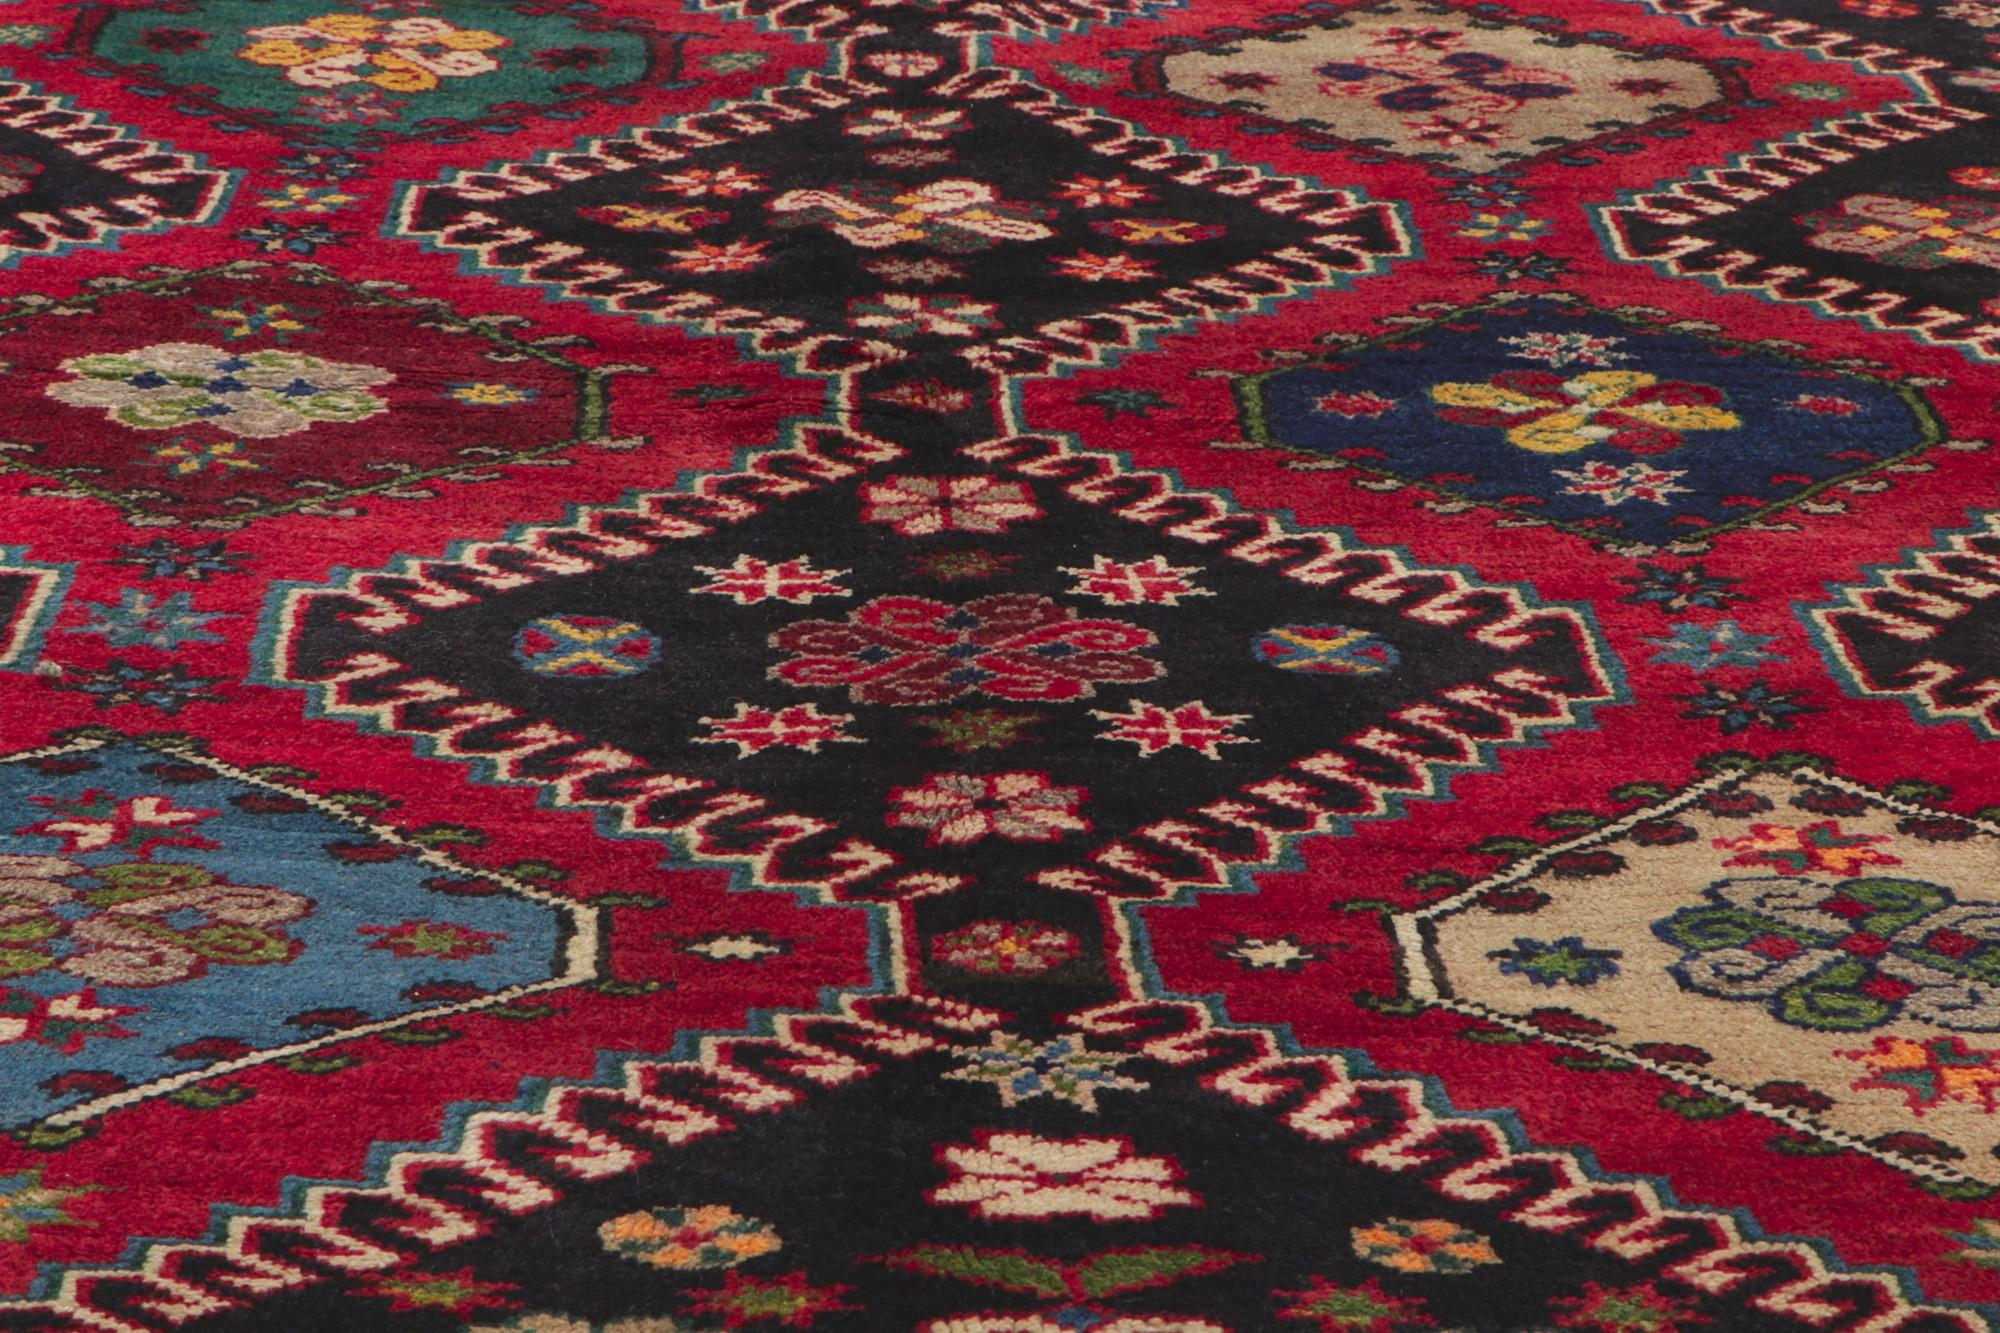 Vintage Persian Shiraz Rug, Tribal Enchantment Meets Modern Masculine Appeal In Good Condition For Sale In Dallas, TX